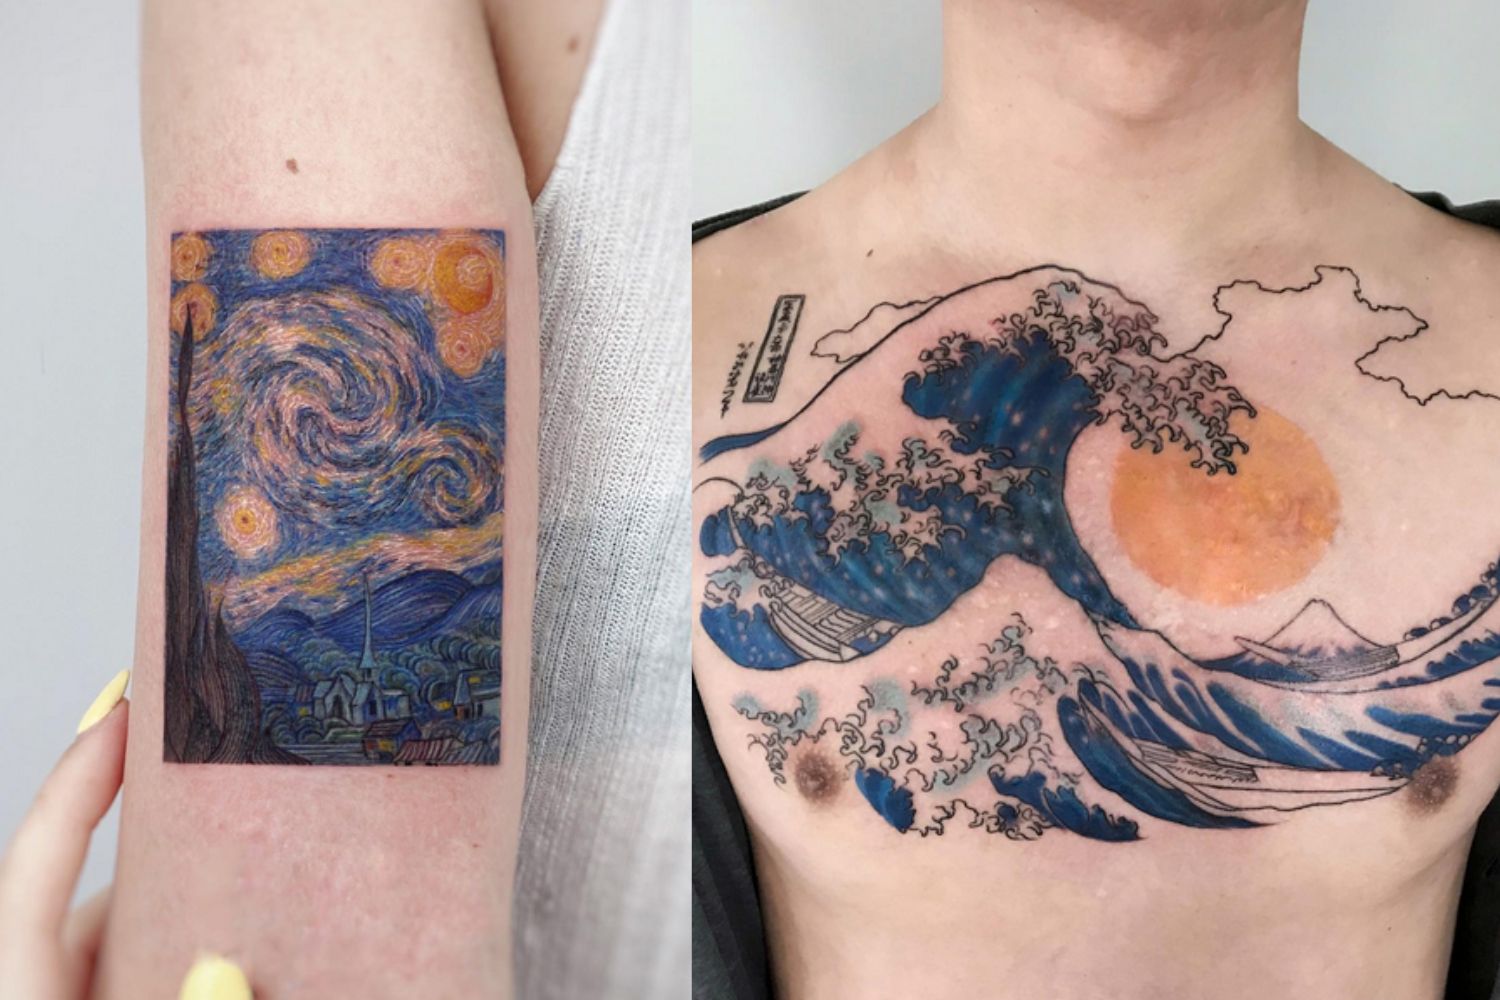 Johan Castillo, that surrealist touch that sets his work free - Tattoo Life